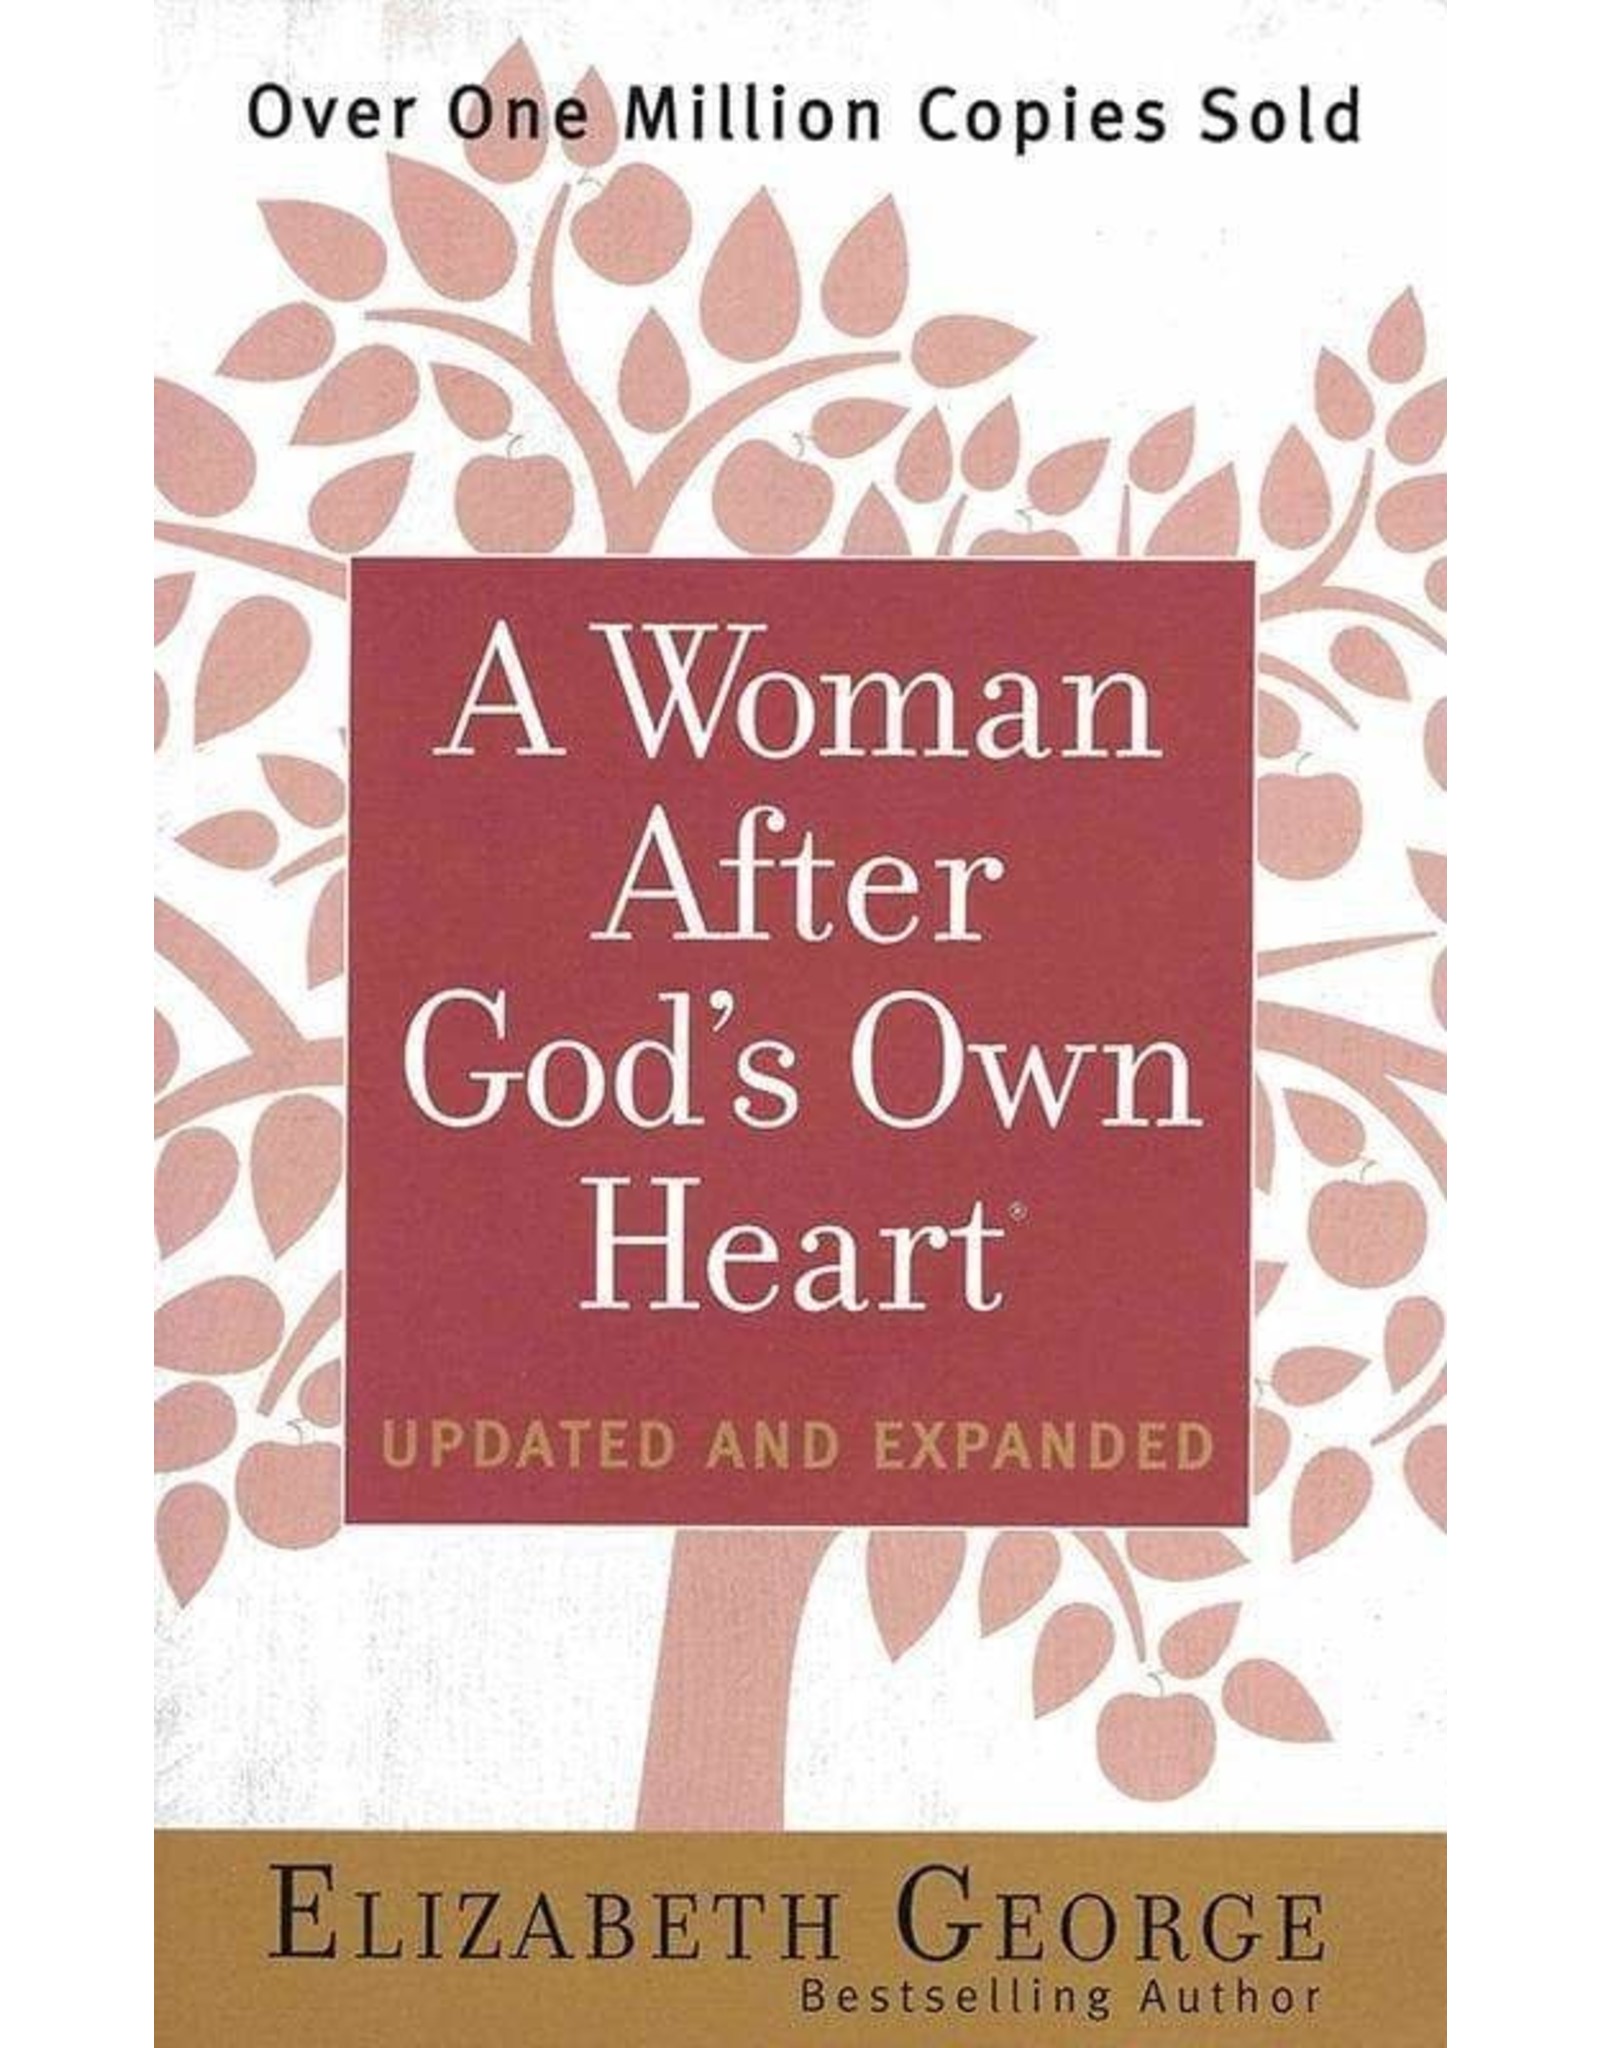 Elizabeth George Woman After God's Own Heart, A (Updated and Expanded)